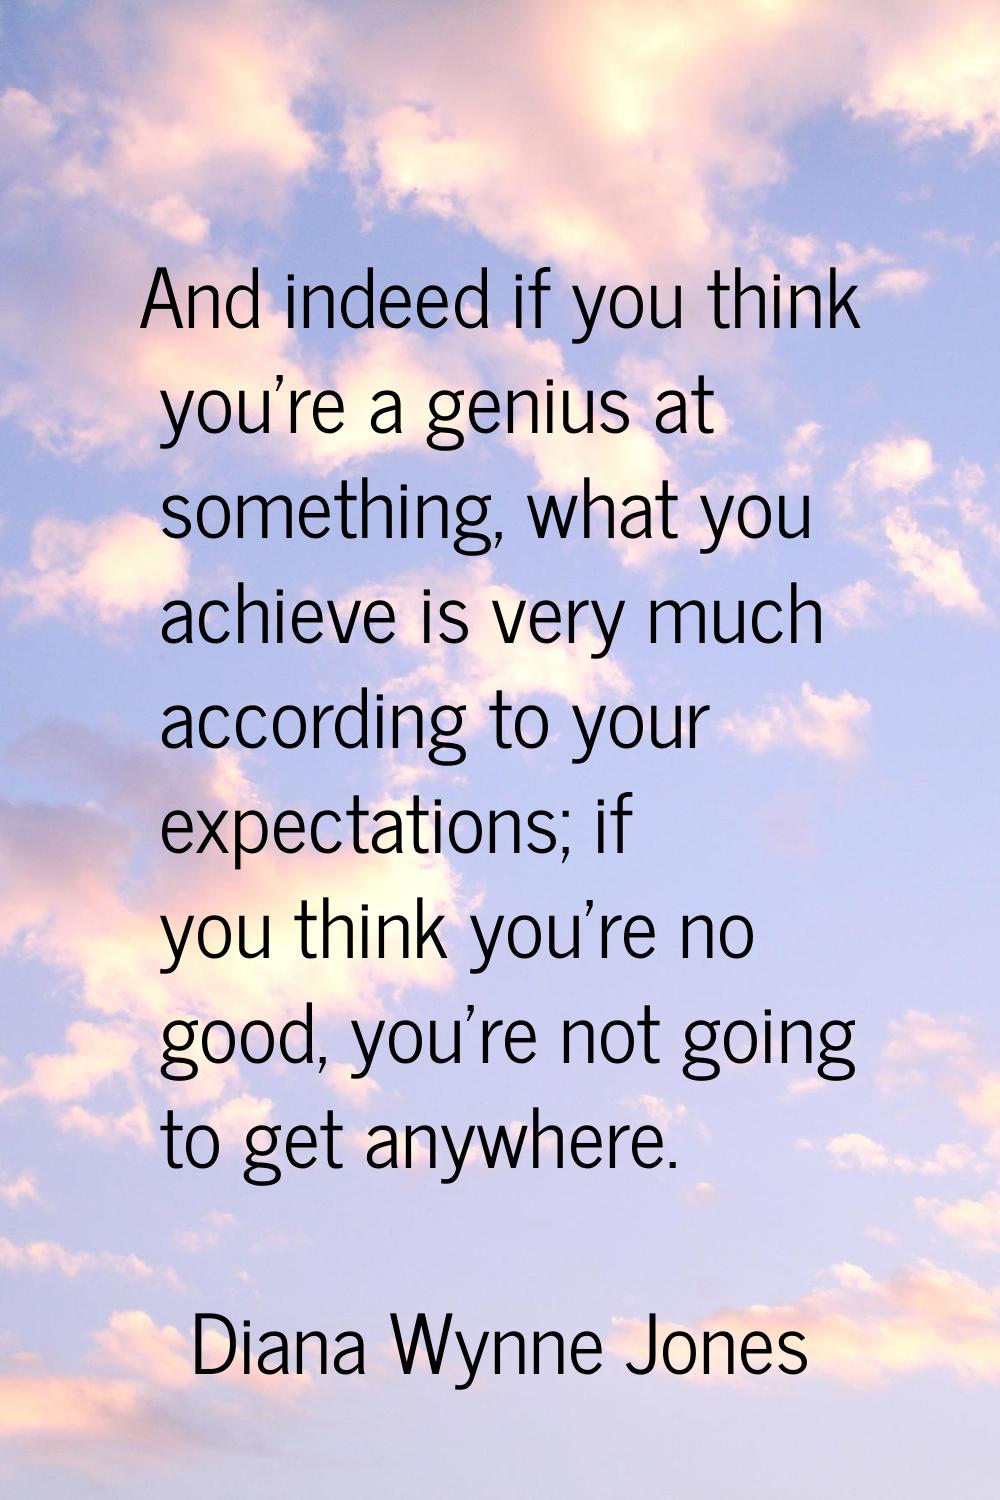 And indeed if you think you're a genius at something, what you achieve is very much according to yo